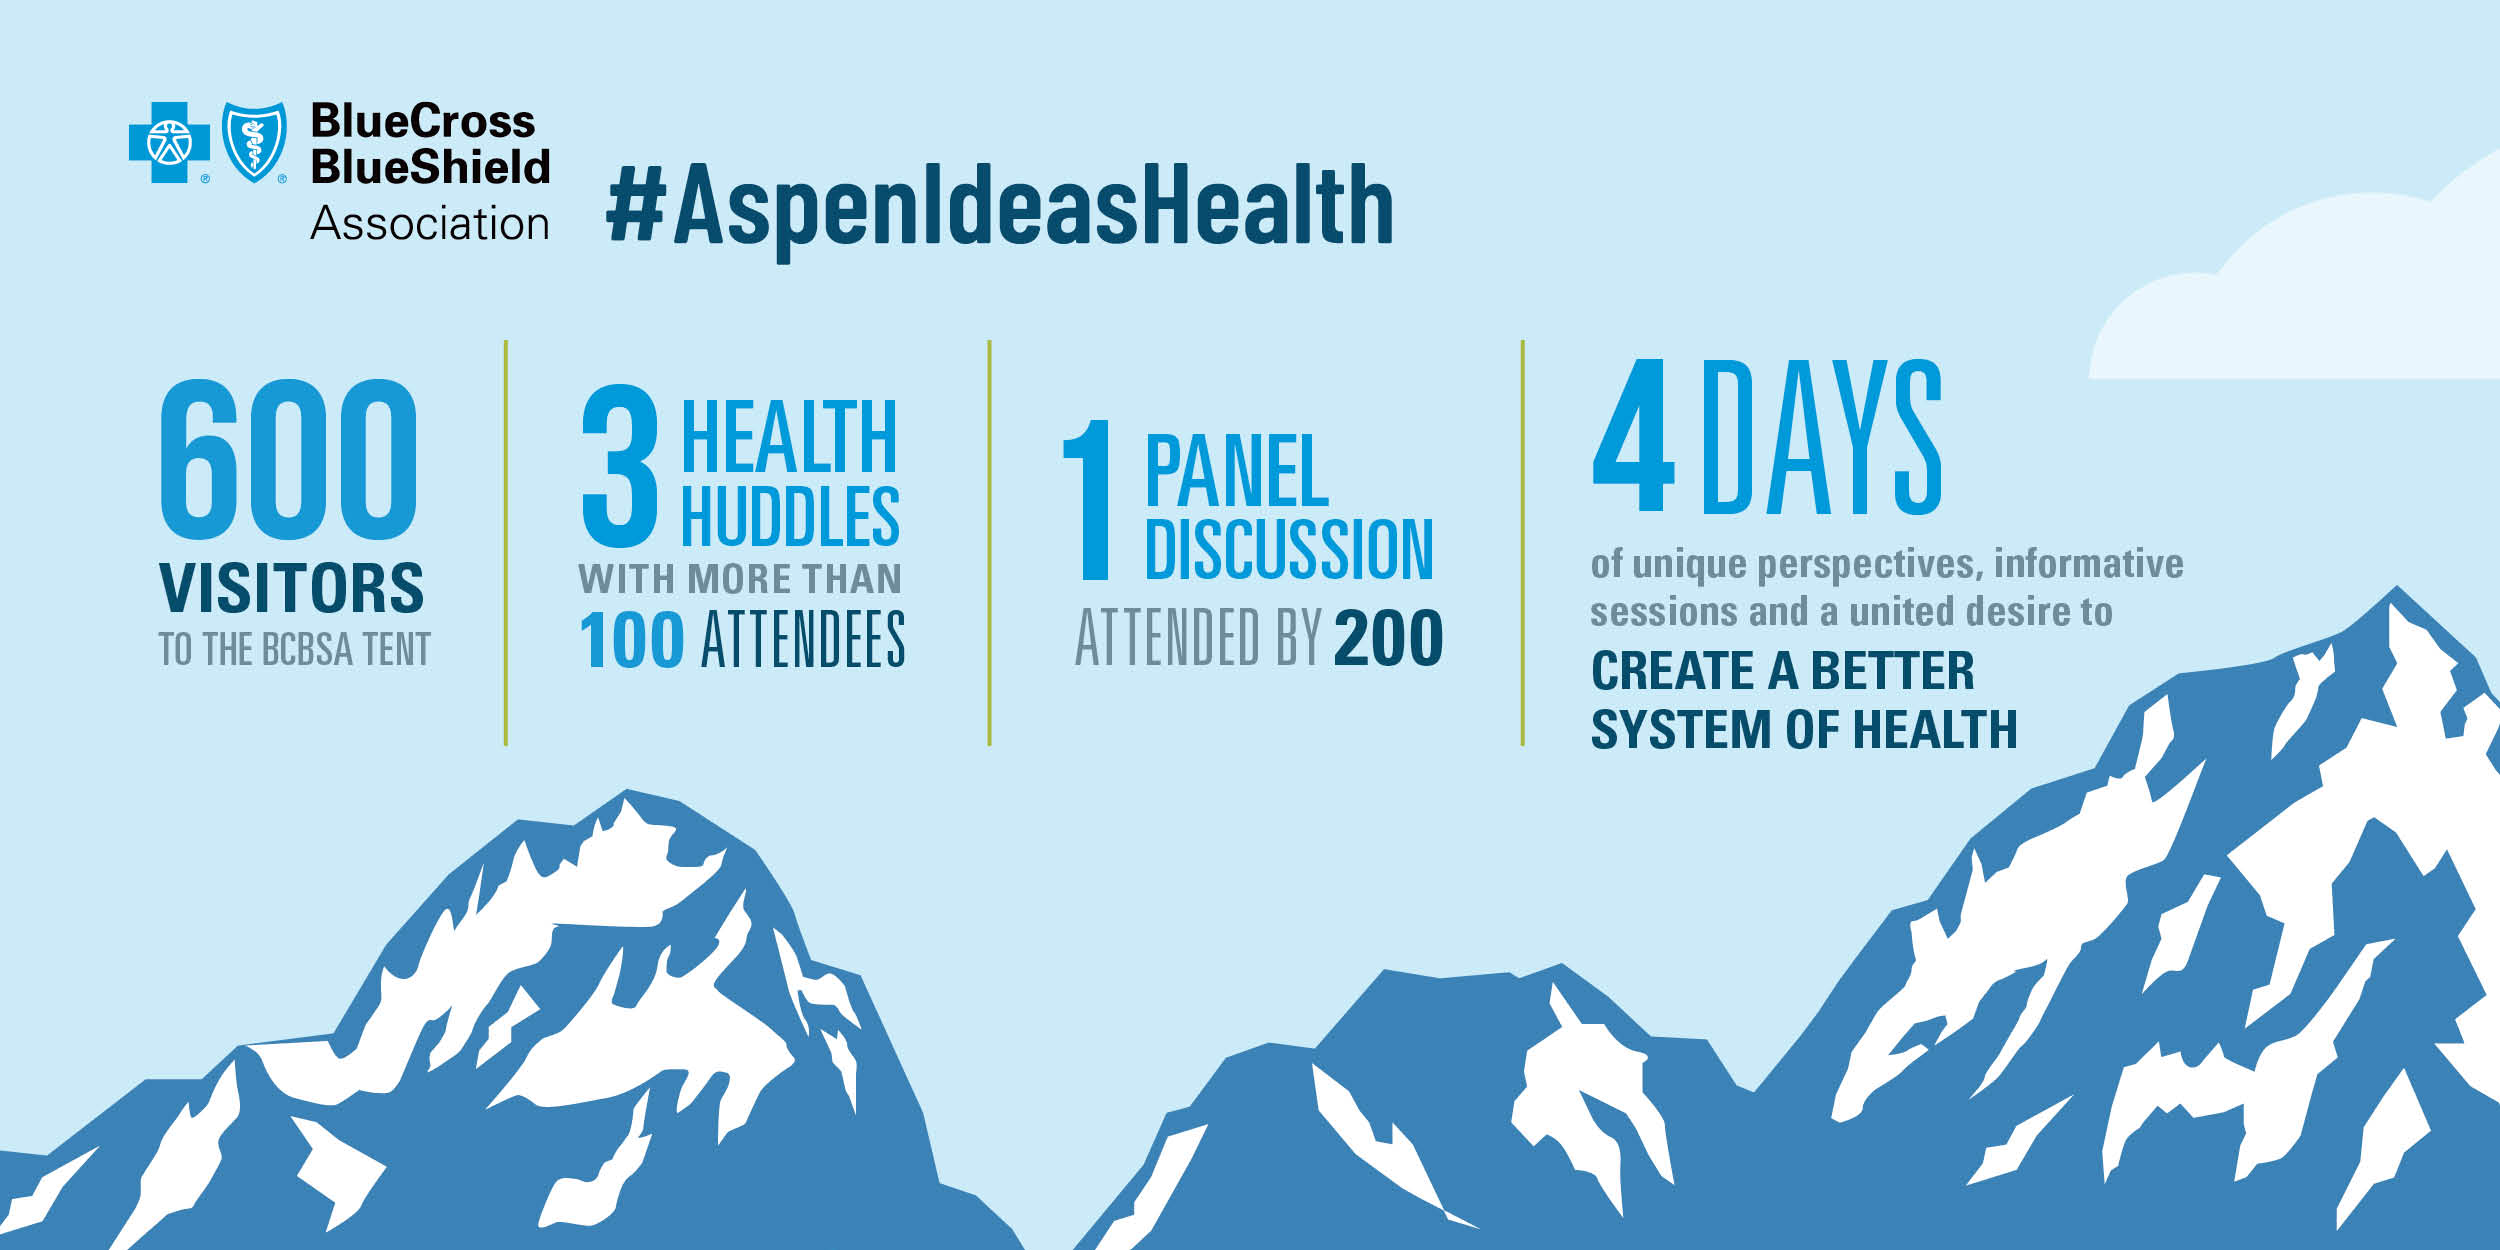 AspenIdeasHealth - 600 visitors to the BCBSA tent, 3 health huddles with more than 100 attendees, 1 panel discussion attended by 200, 4 days of unique perspectives, informative sessions and a desire to create a better system of health